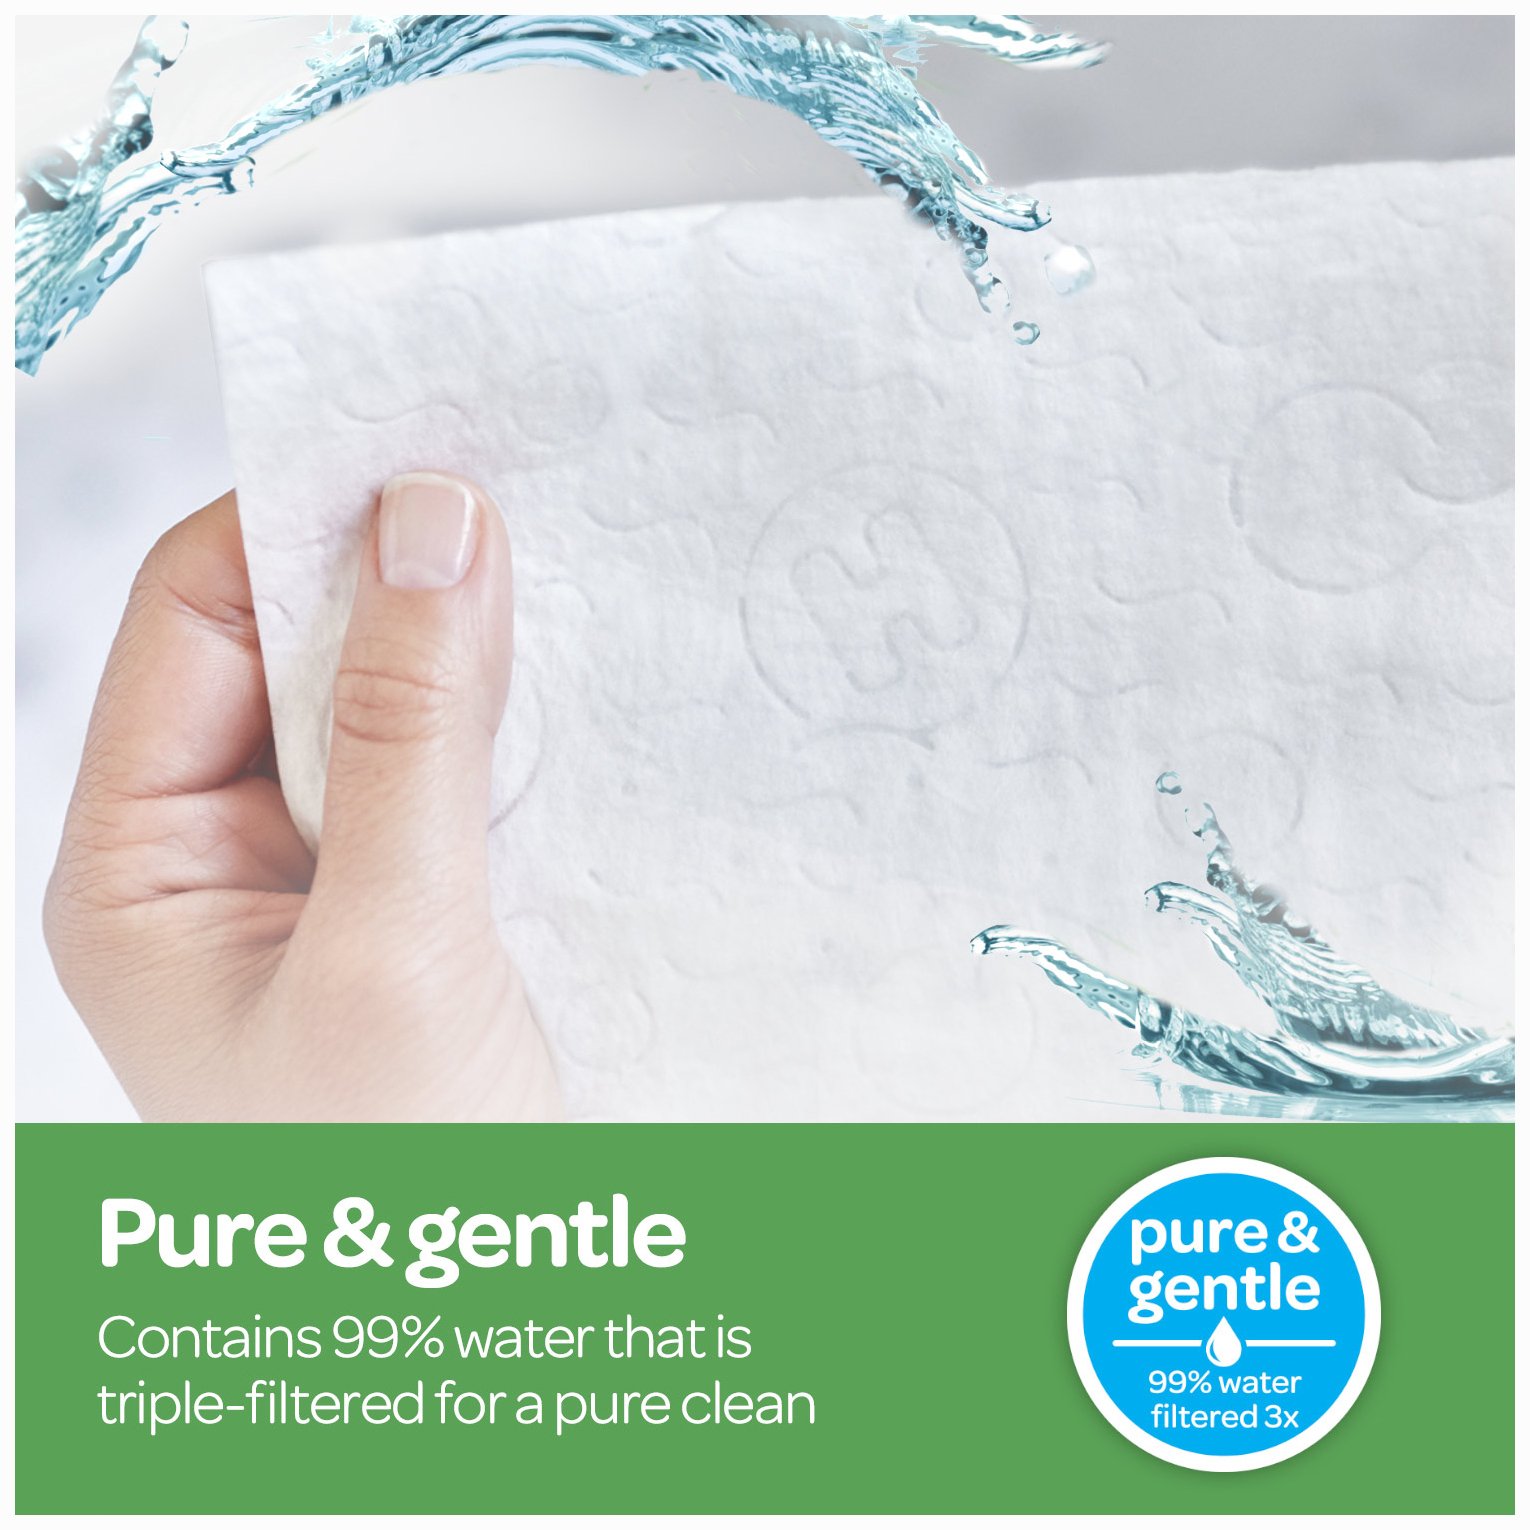 HUGGIES Natural Care Unscented Baby Wipes, Sensitive, Water-Based, 6 Flip-top Packs, 56 Count (Pack of 6)